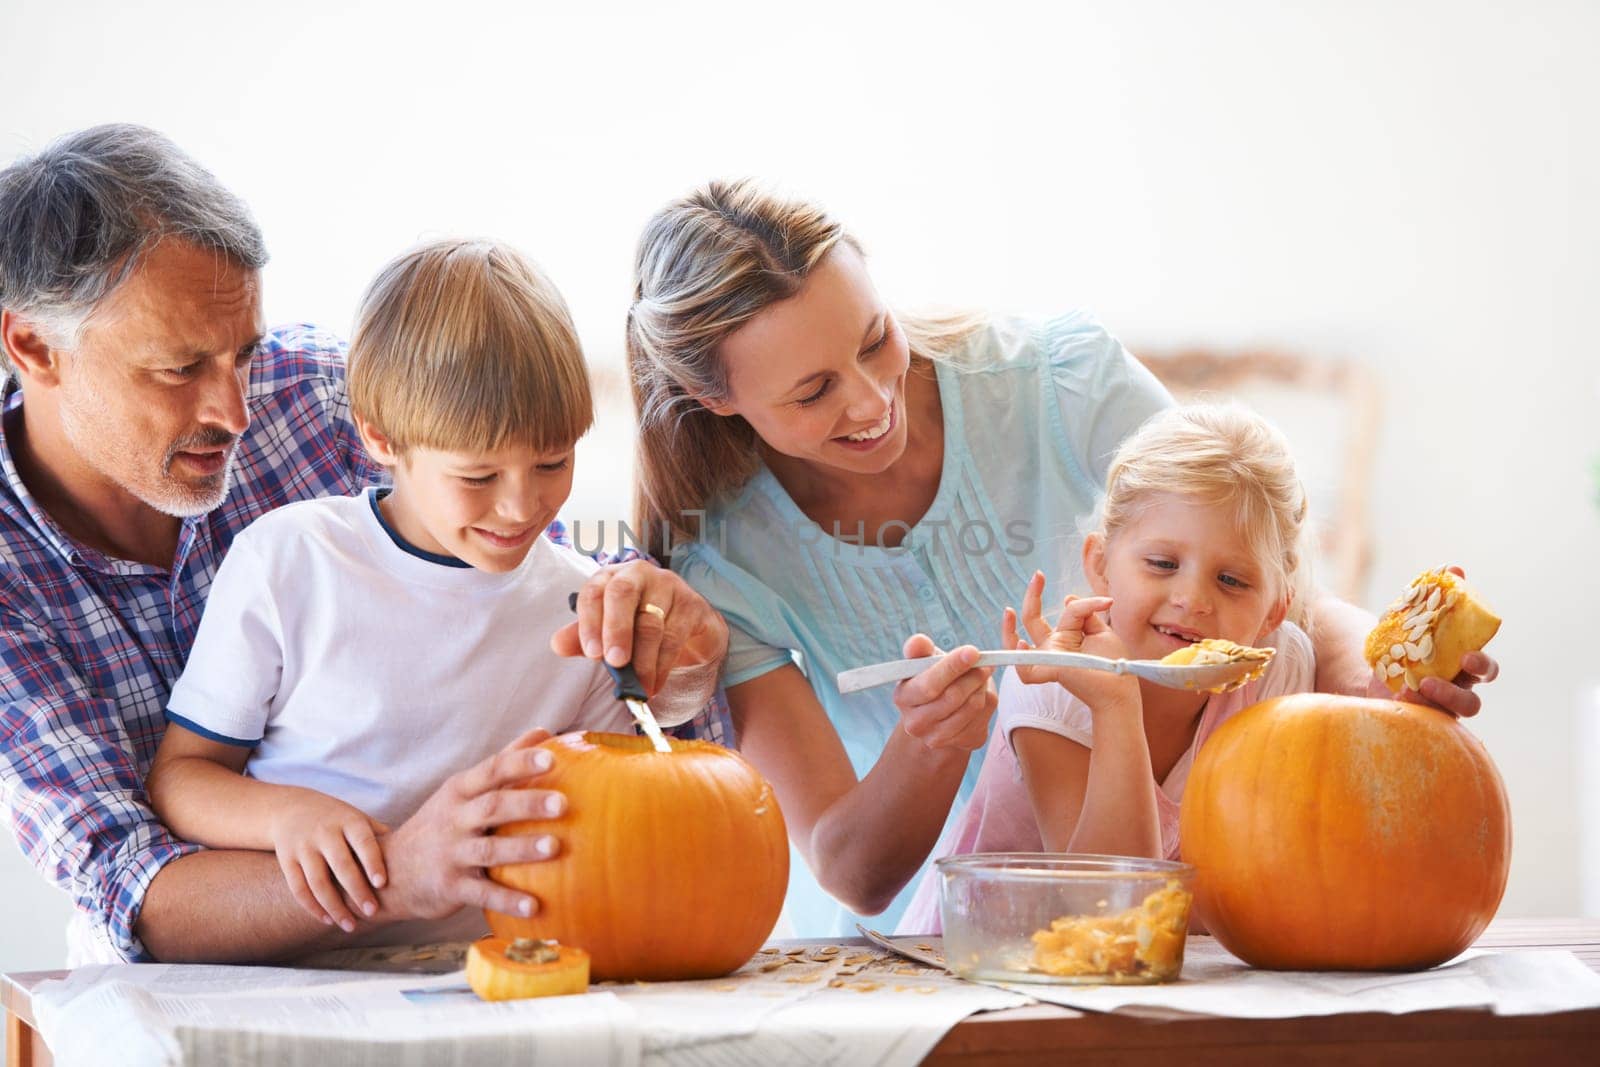 Family, halloween and carving a pumpkin with children in a home for fun and bonding. Man and woman or parents and young kids together for creativity, holiday lantern and happy craft at a table.